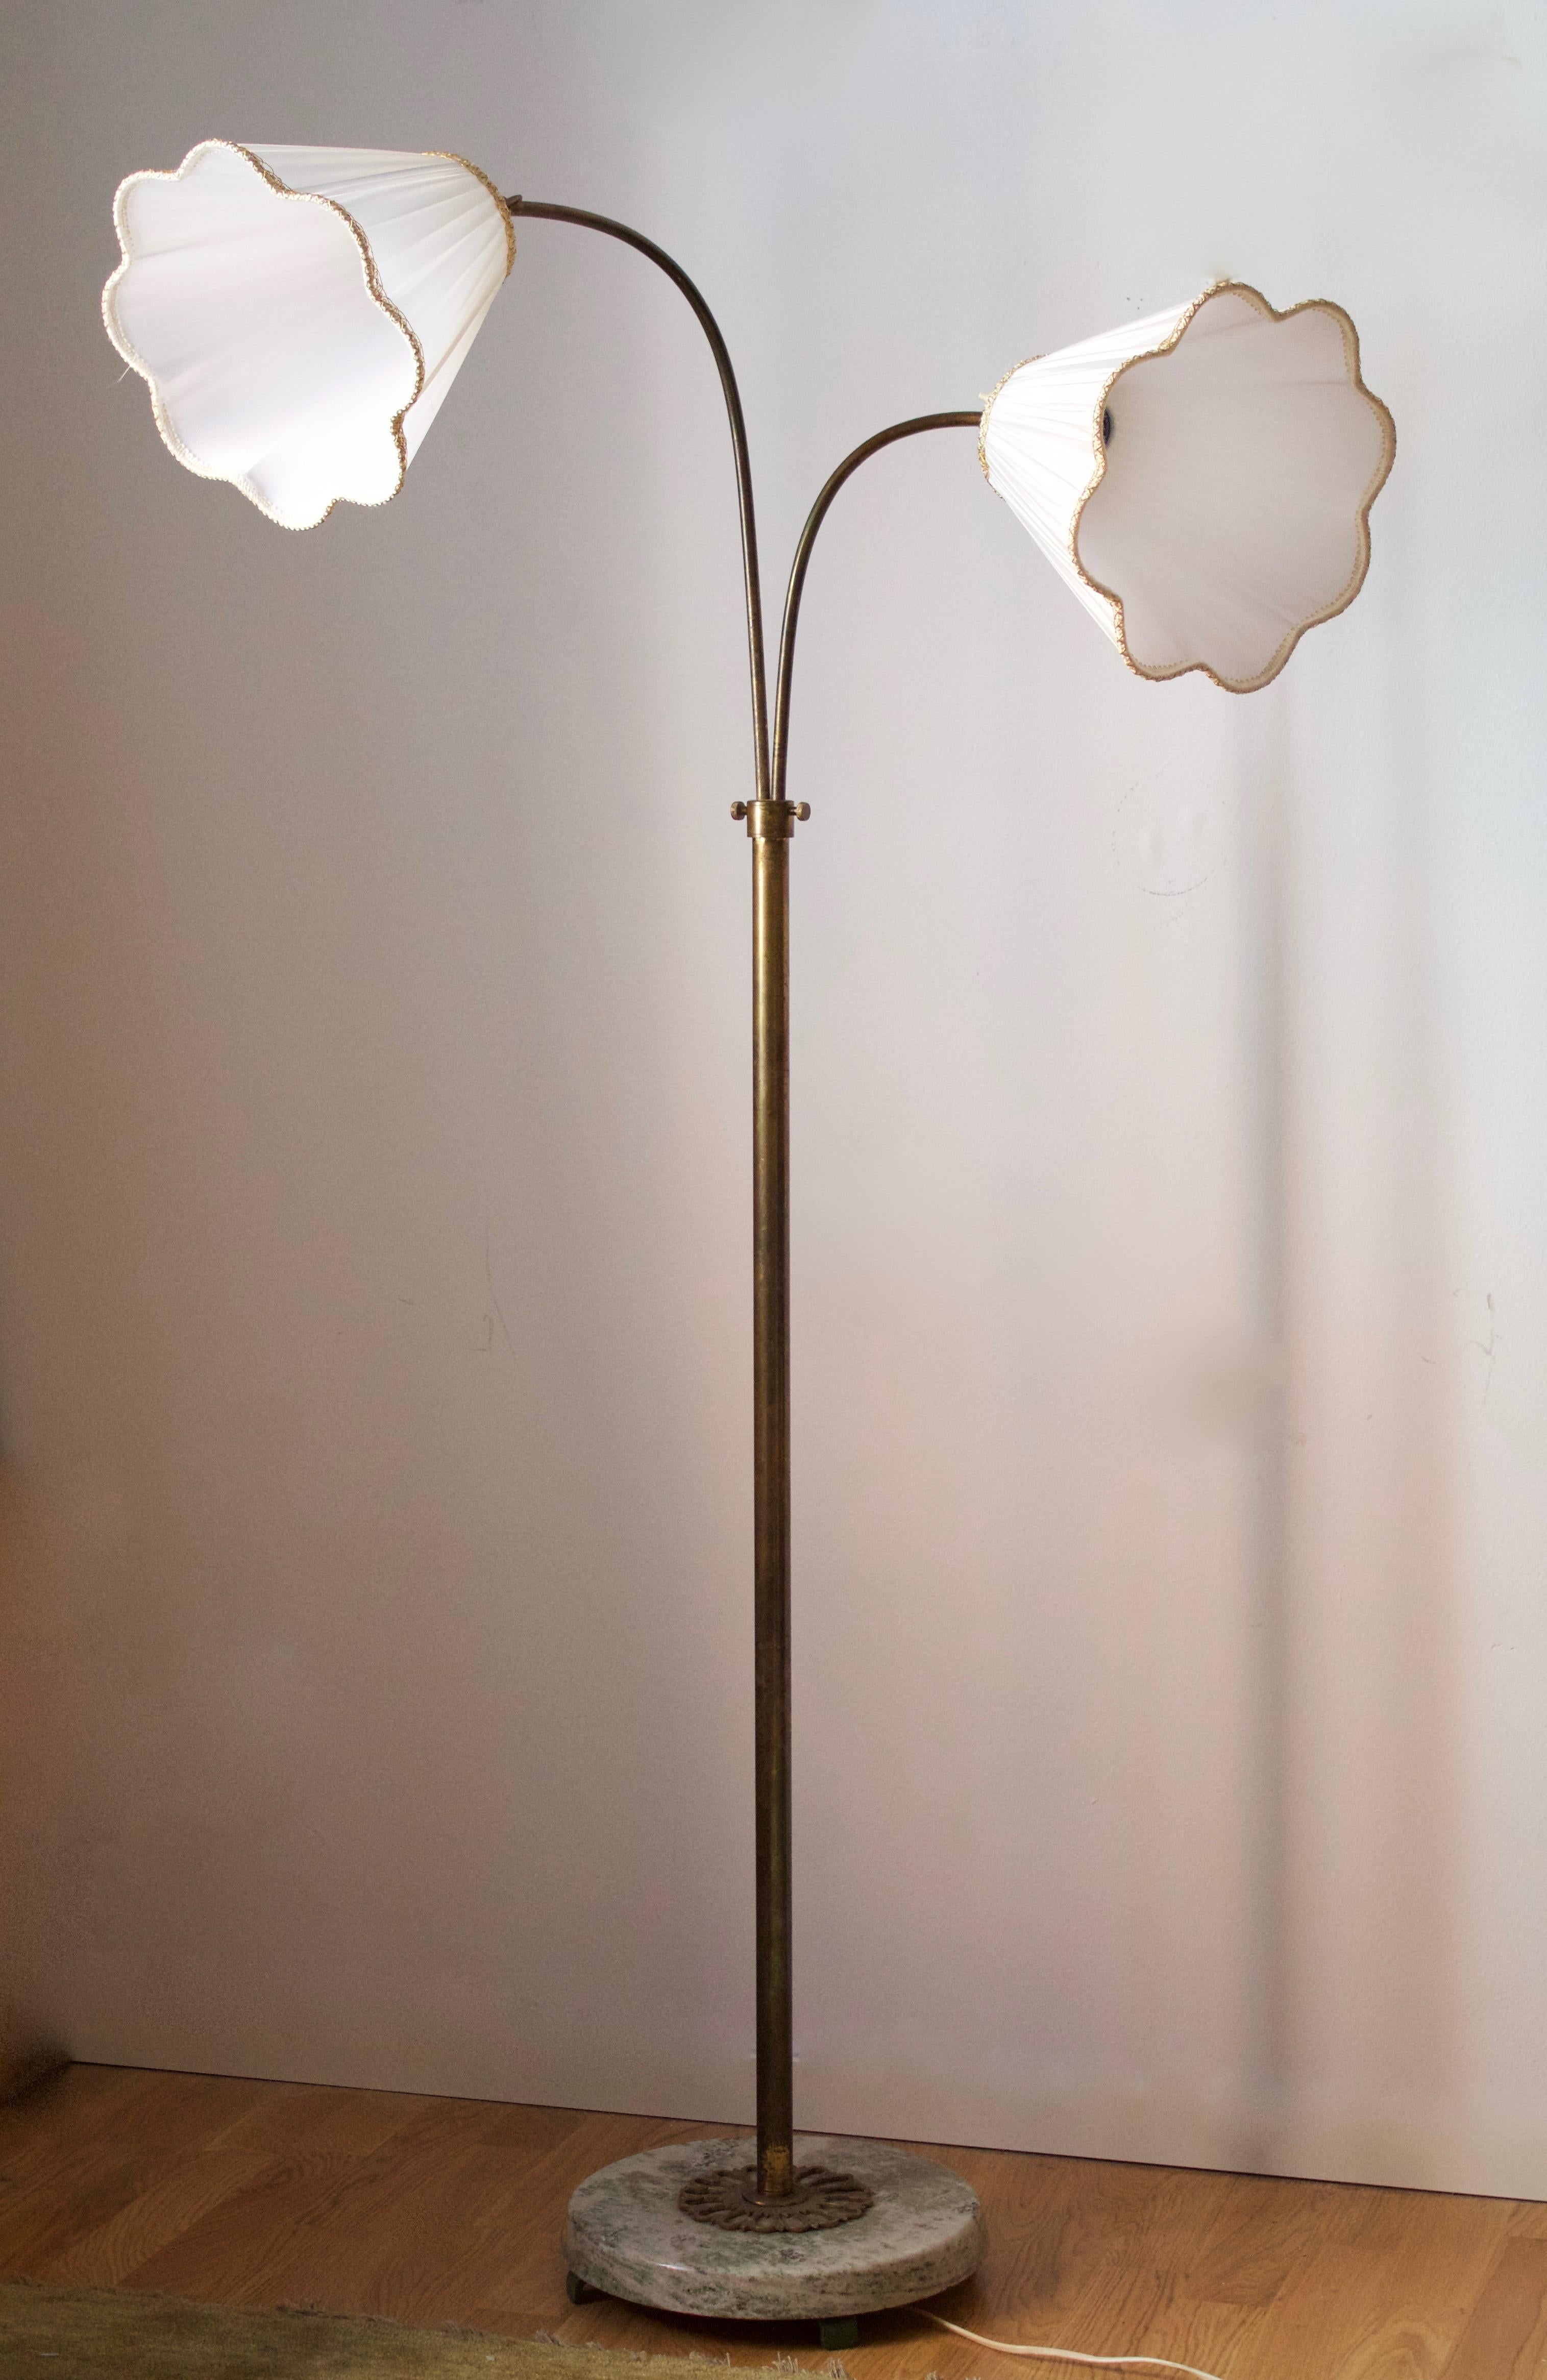 An adjustable floor lamp. Designed and produced in Sweden, 1940s. Brass with heavy marble base. Brand new lampshades of period model, handmade in Sweden.